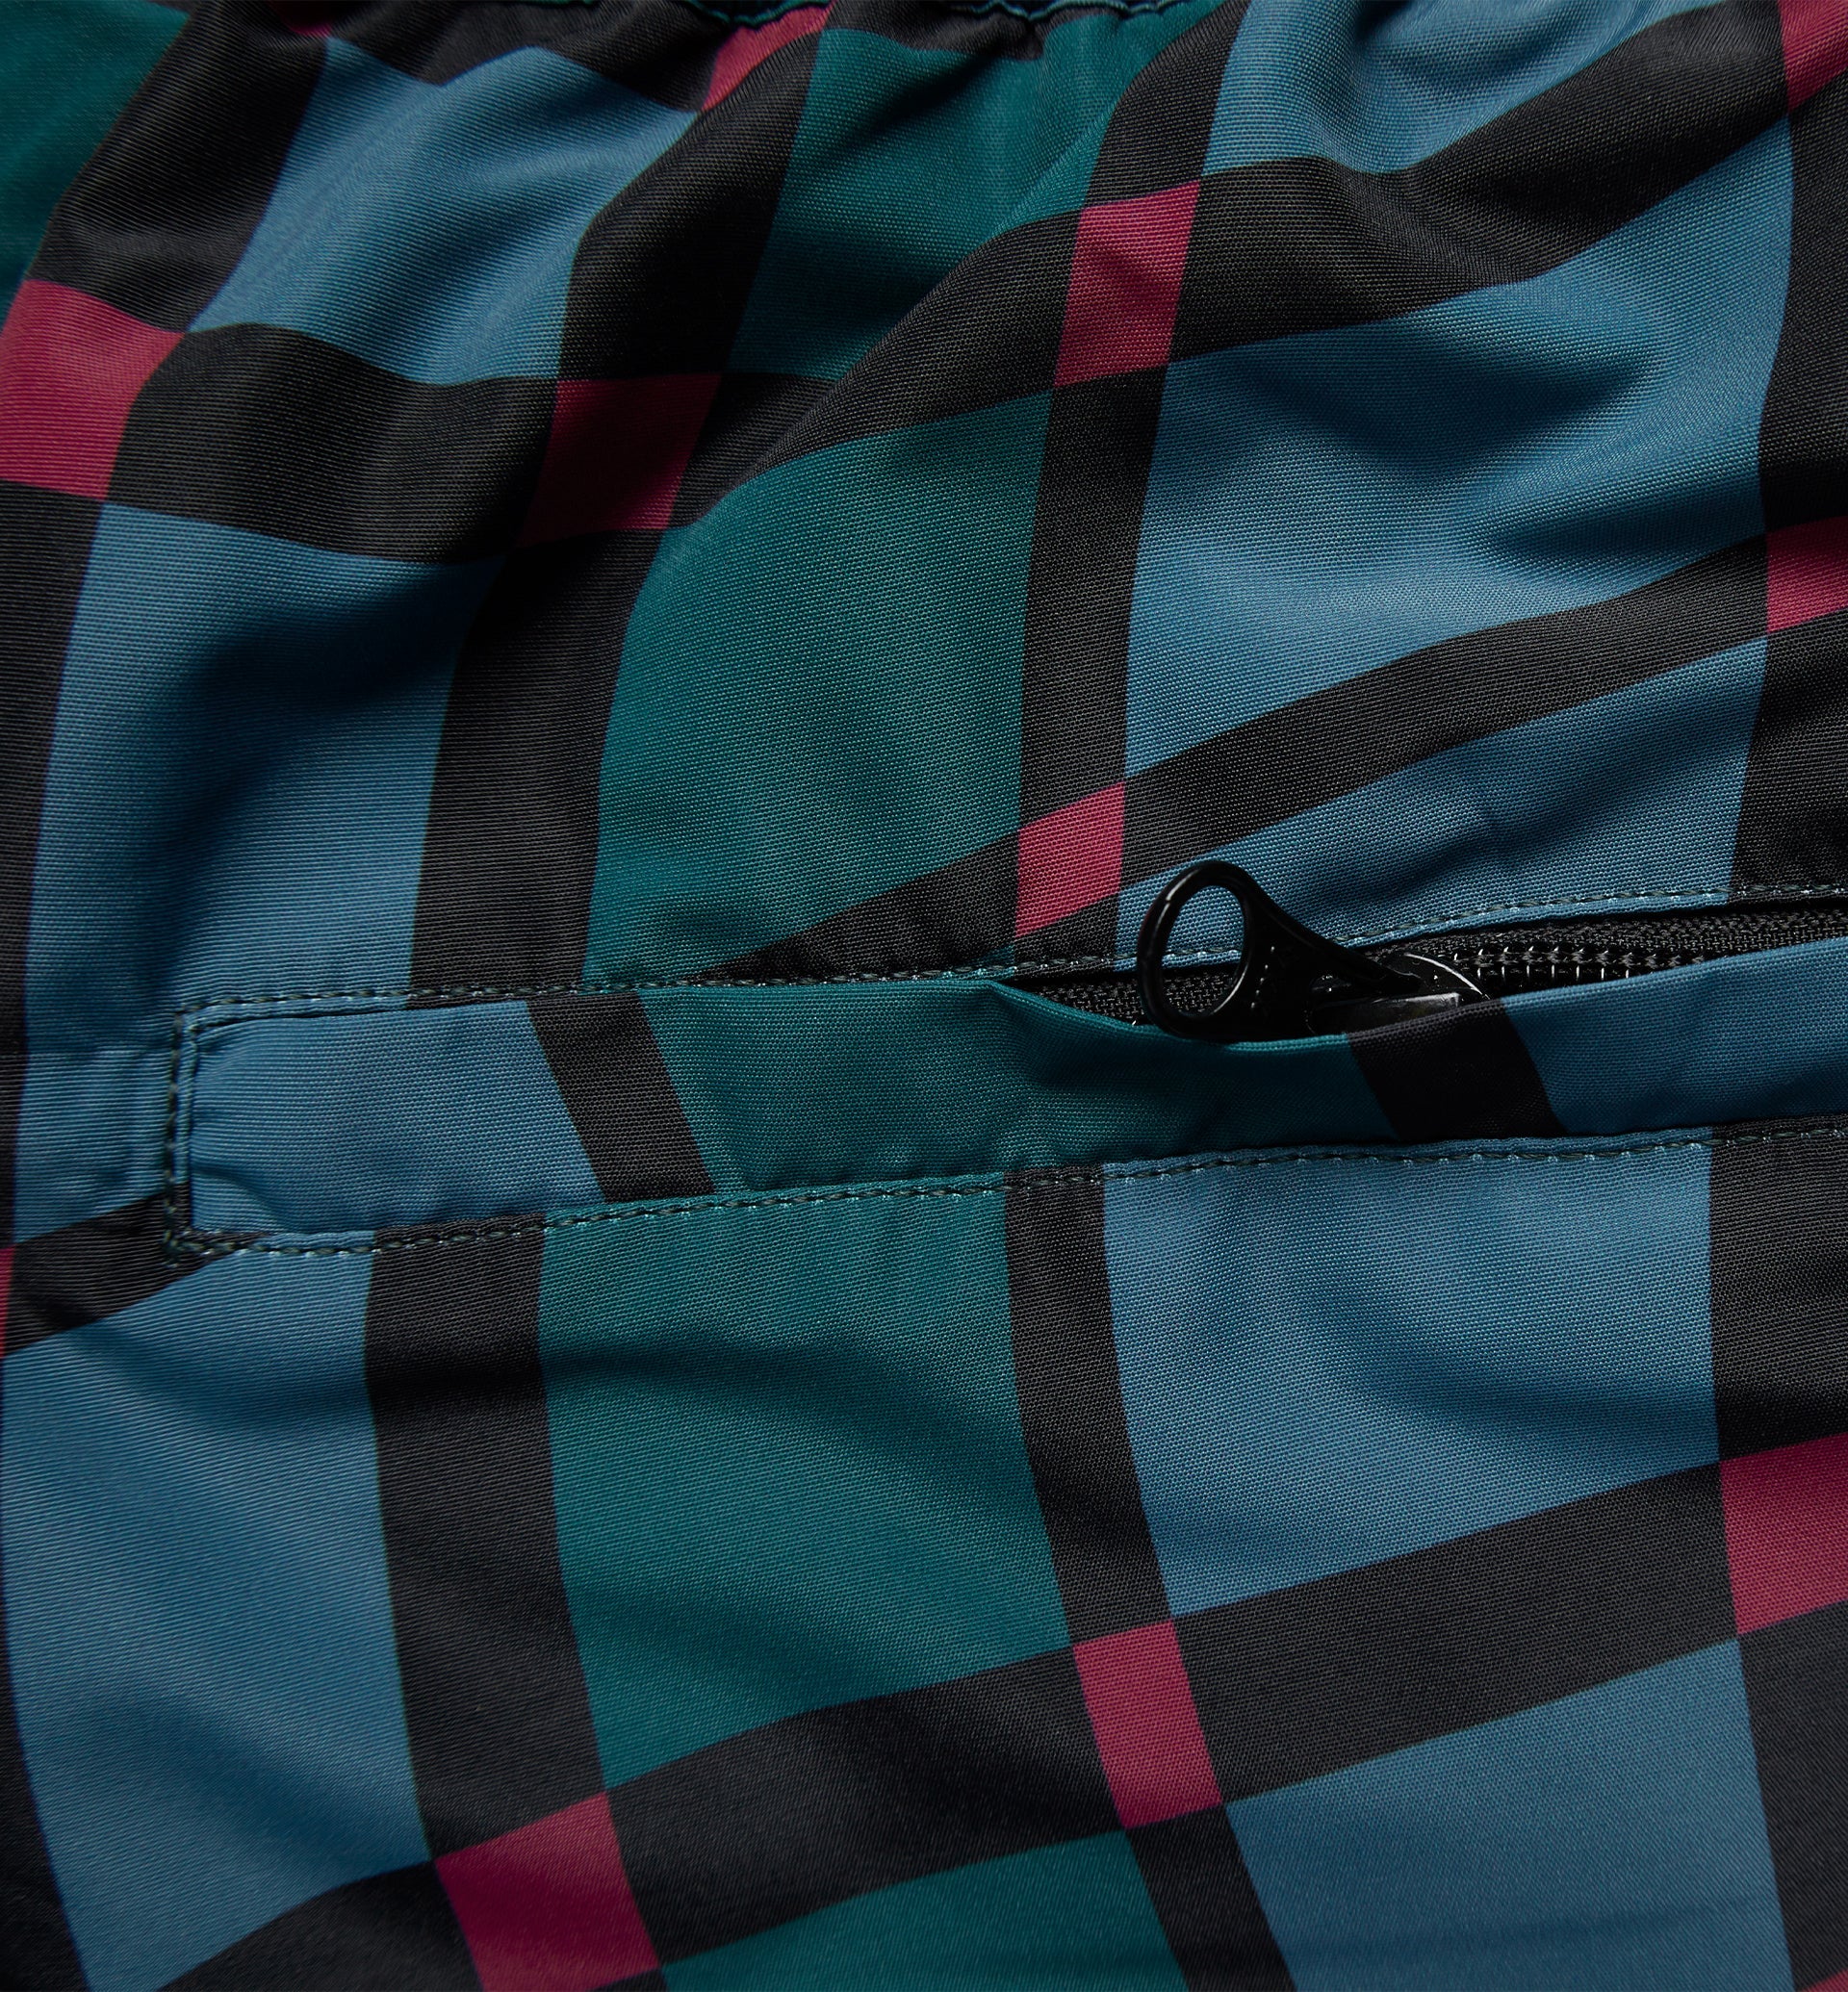 Parra - squared waves pattern track pants